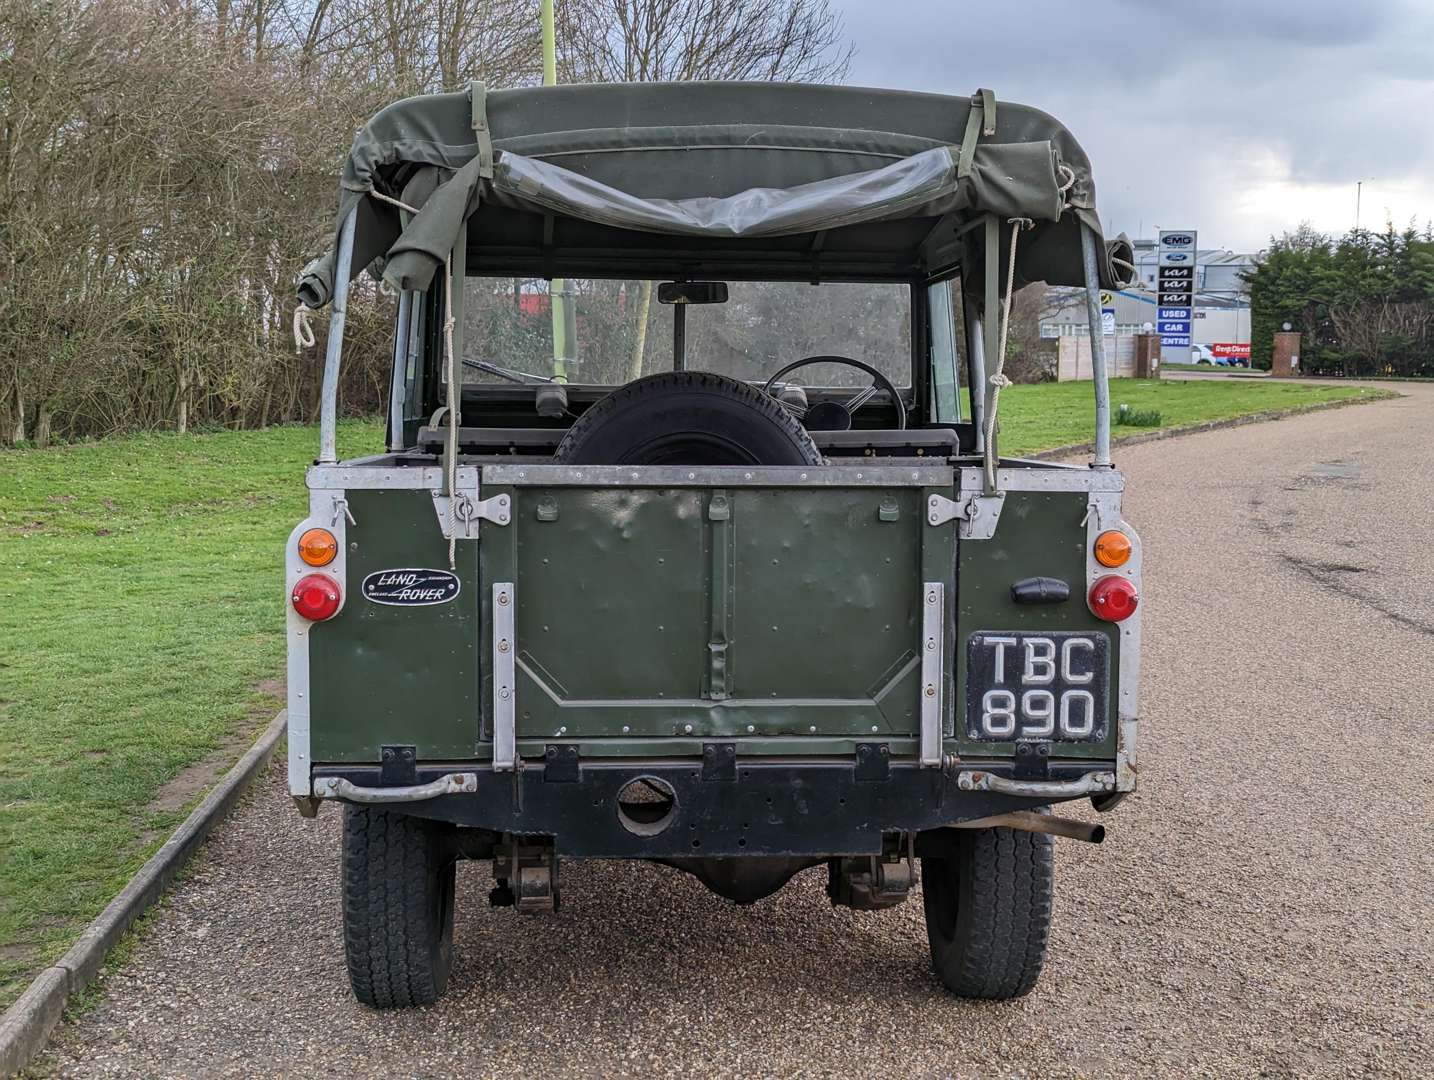 1958 LAND ROVER SWB SERIES II - Image 6 of 26